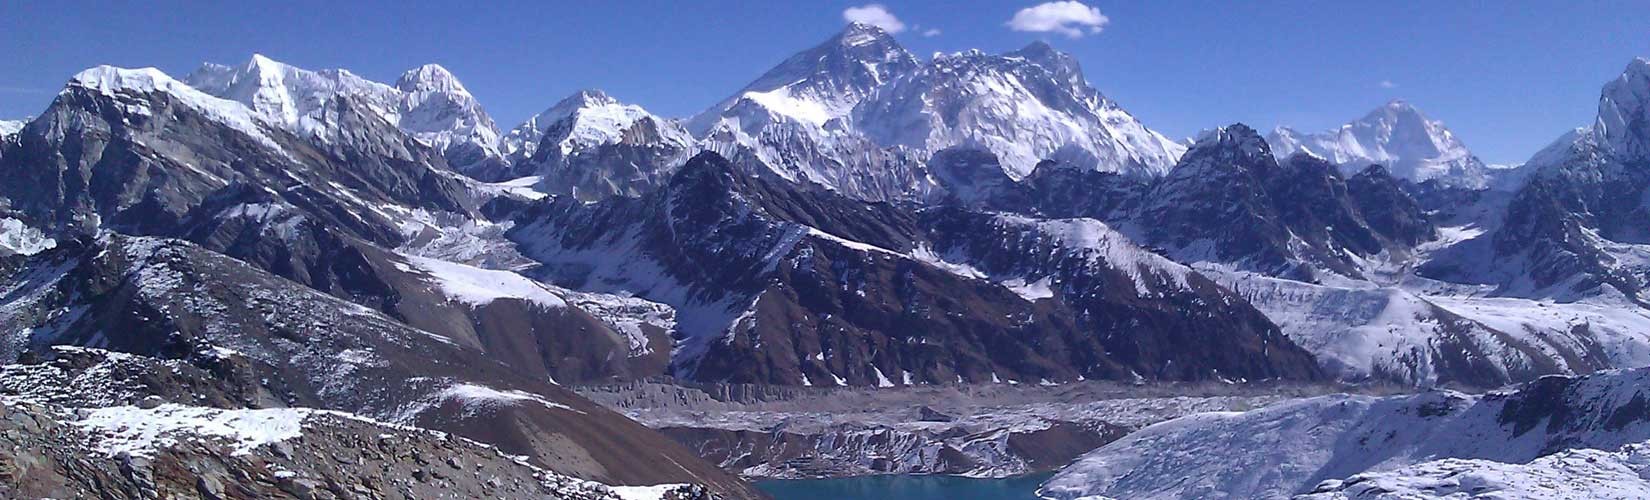 View of Mt Everest and Gokyo Lake from Renjo La